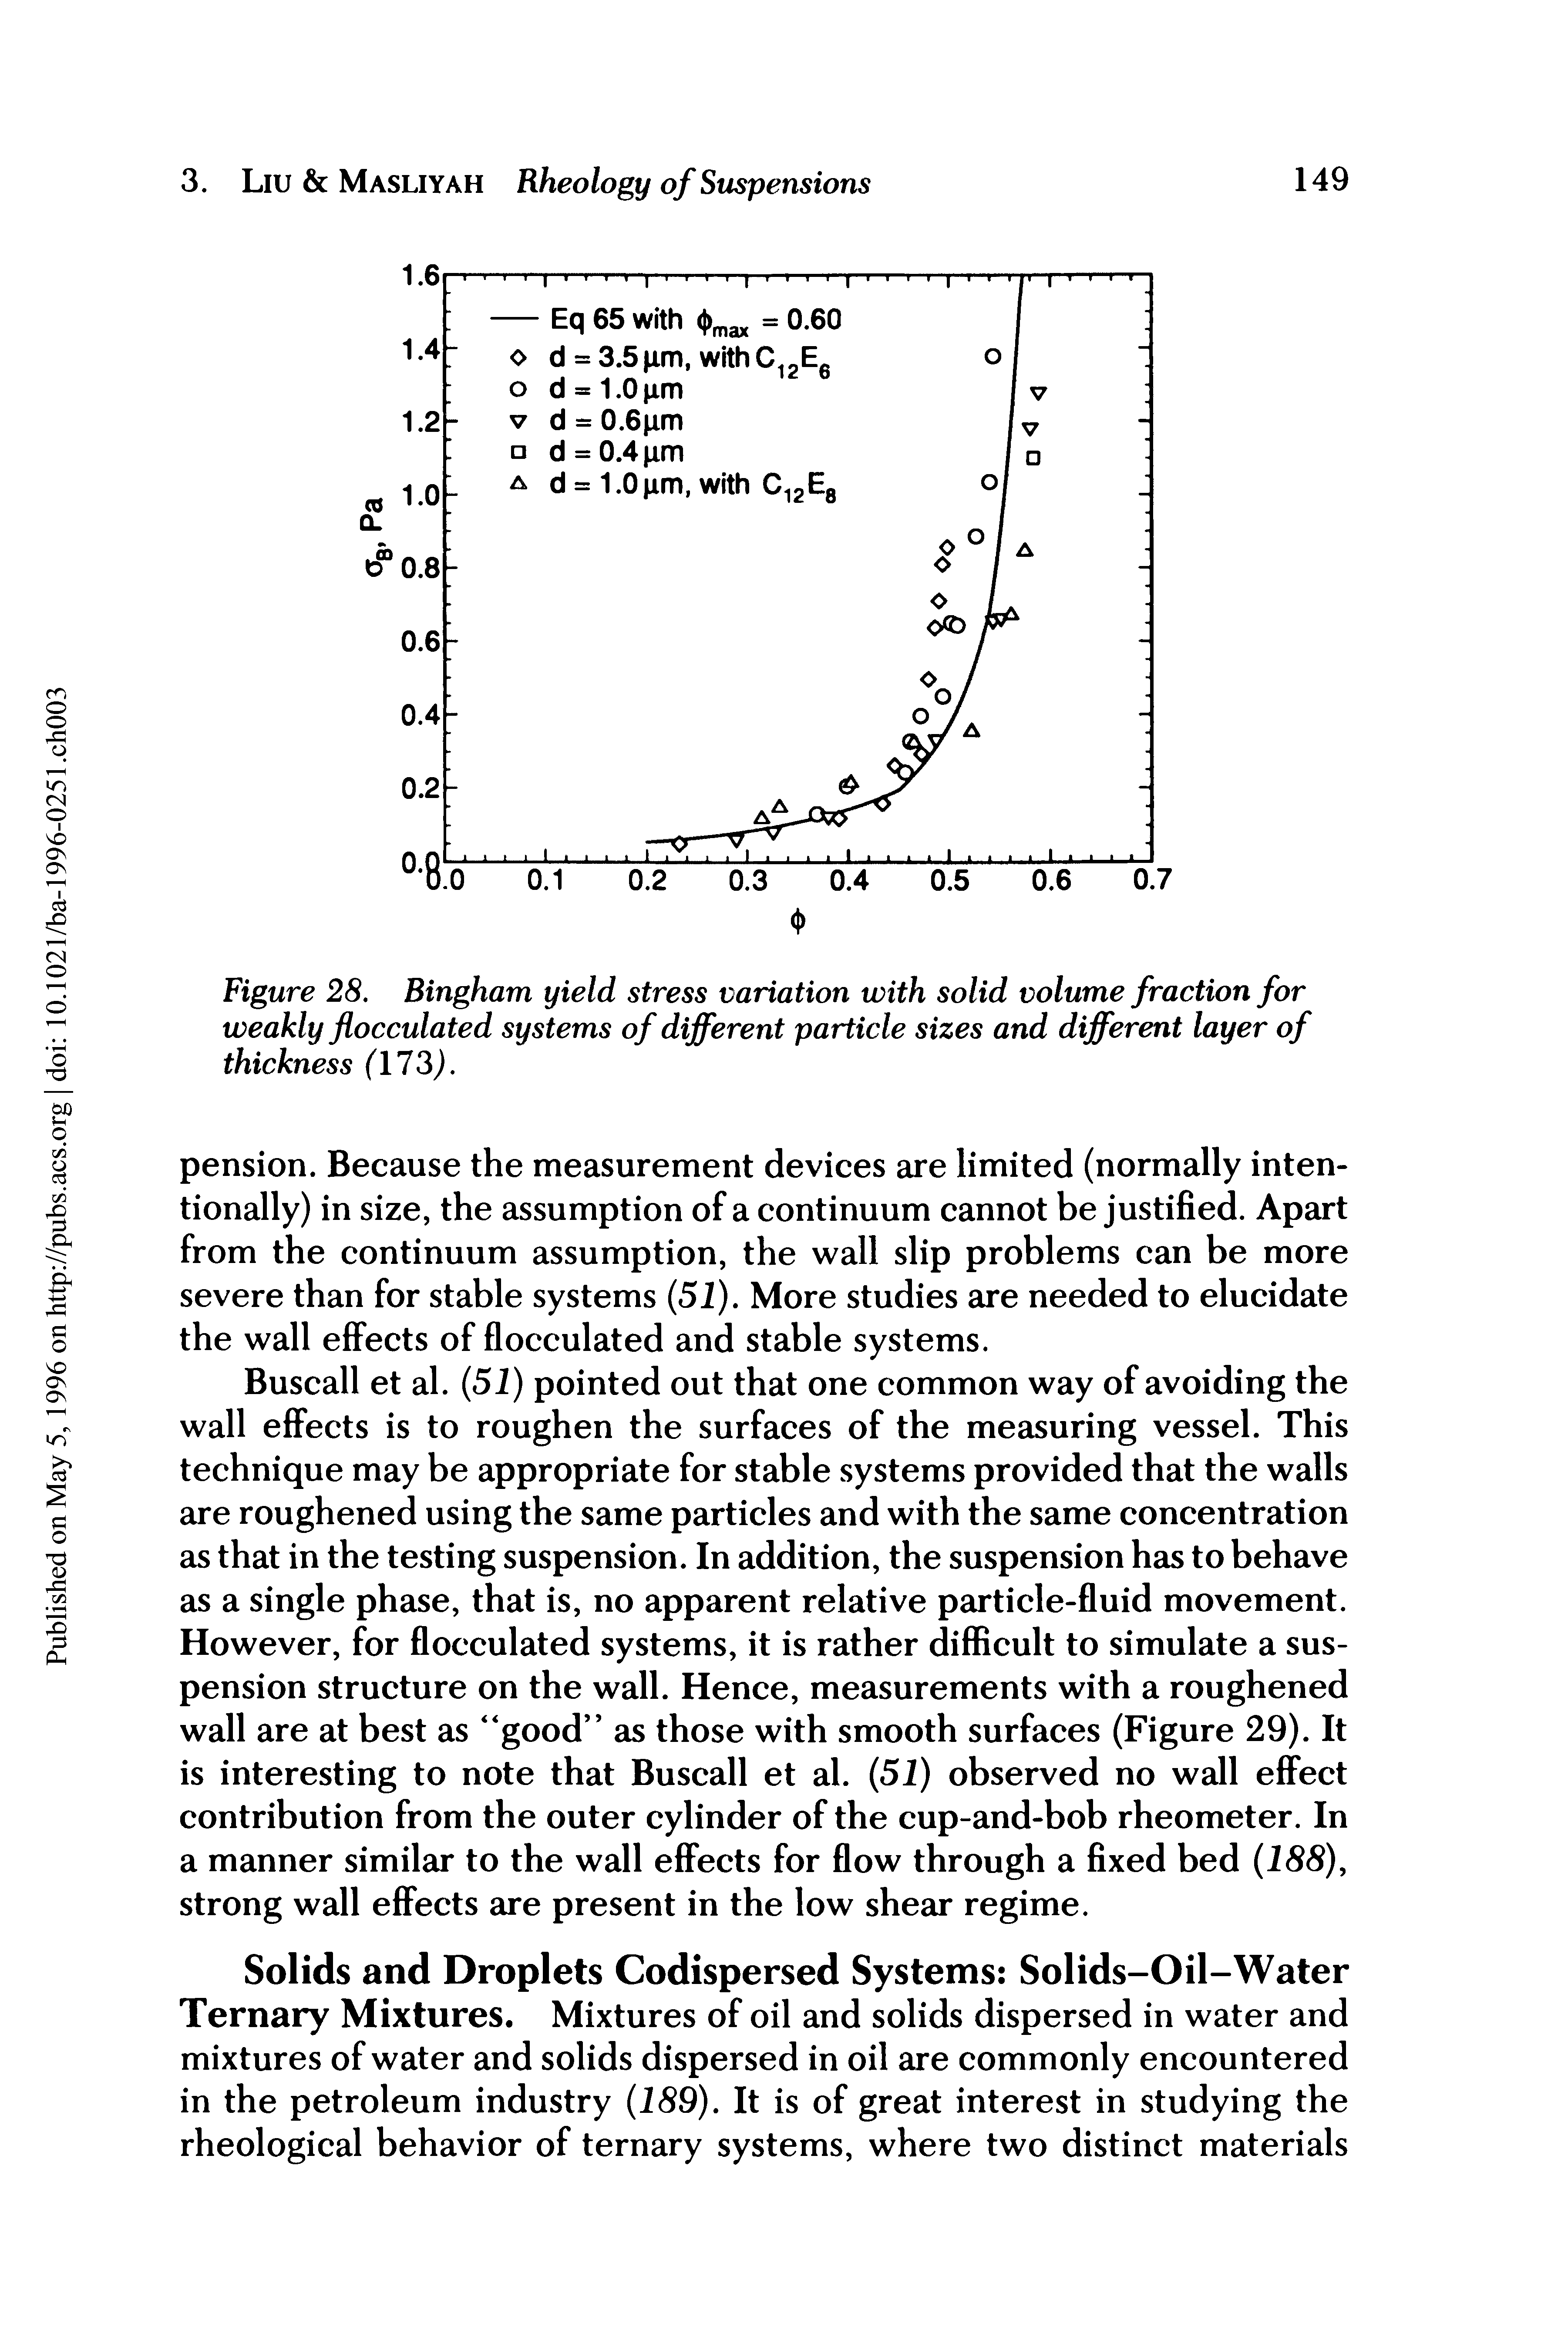 Figure 28. Bingham yield stress variation with solid volume fraction for weakly flocculated systems of different particle sizes and different layer of thickness (173,).